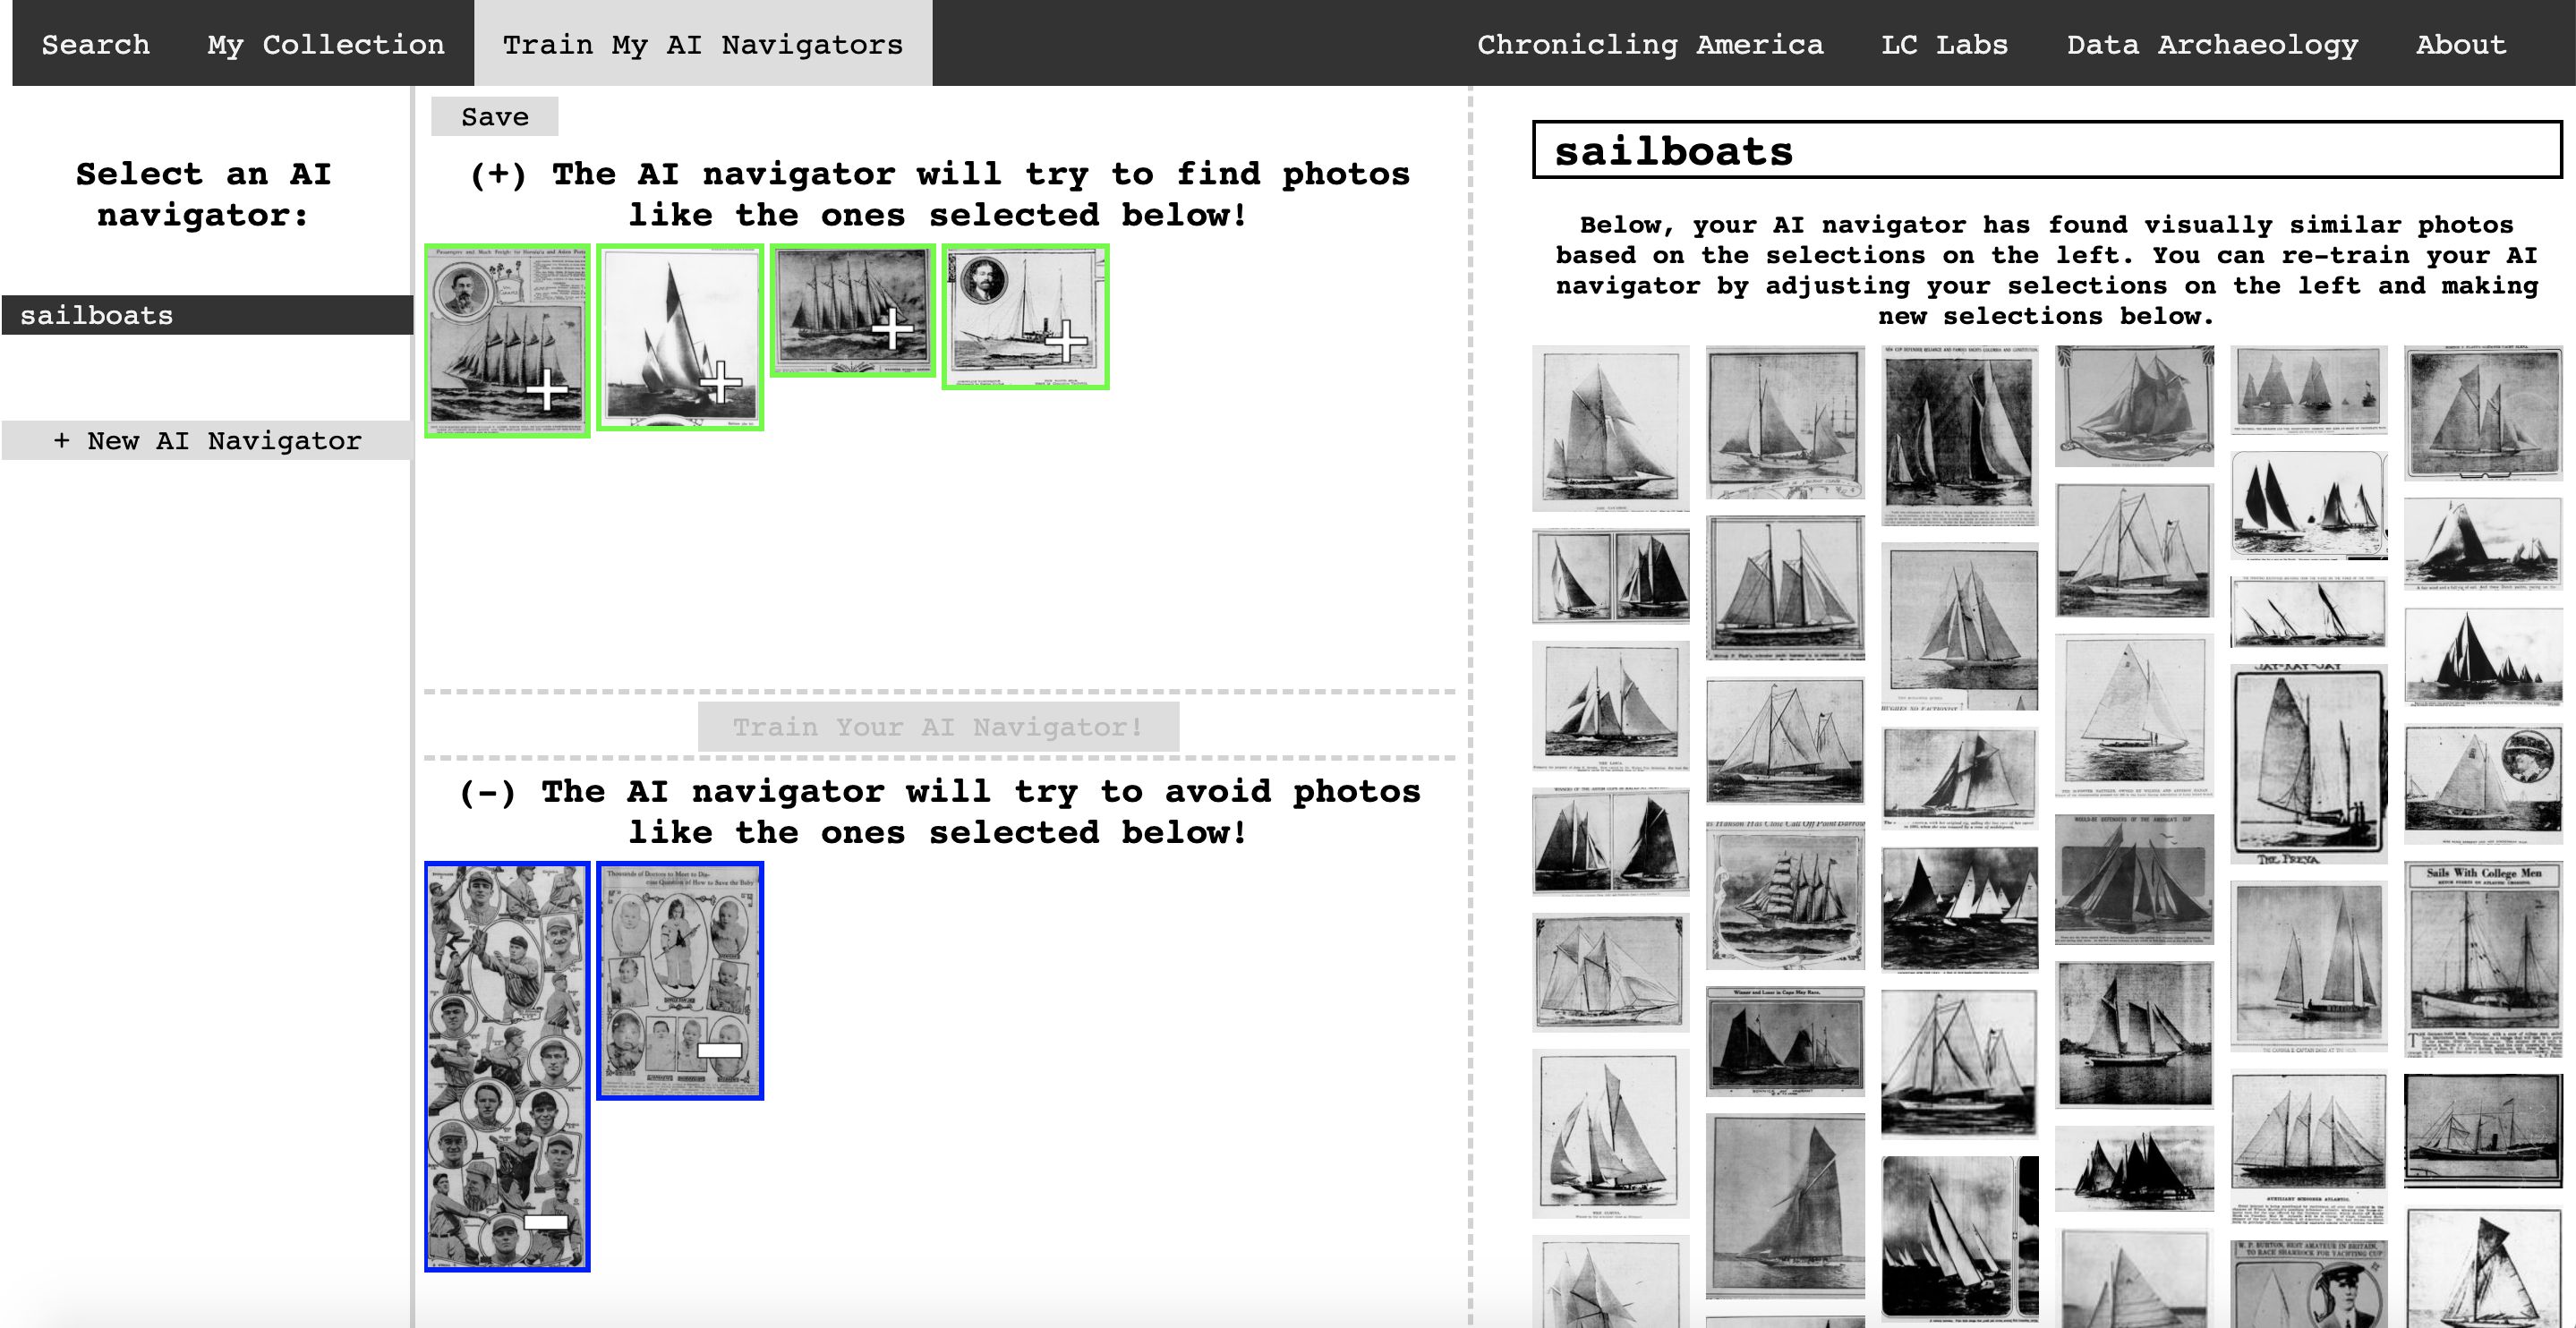 A screenshot of a web application showing images of sailboats from historic newspapers. The top is a selection of photos that closely resemble sailboats. The bottom displays images of false negatives, images that are not of sailboats.